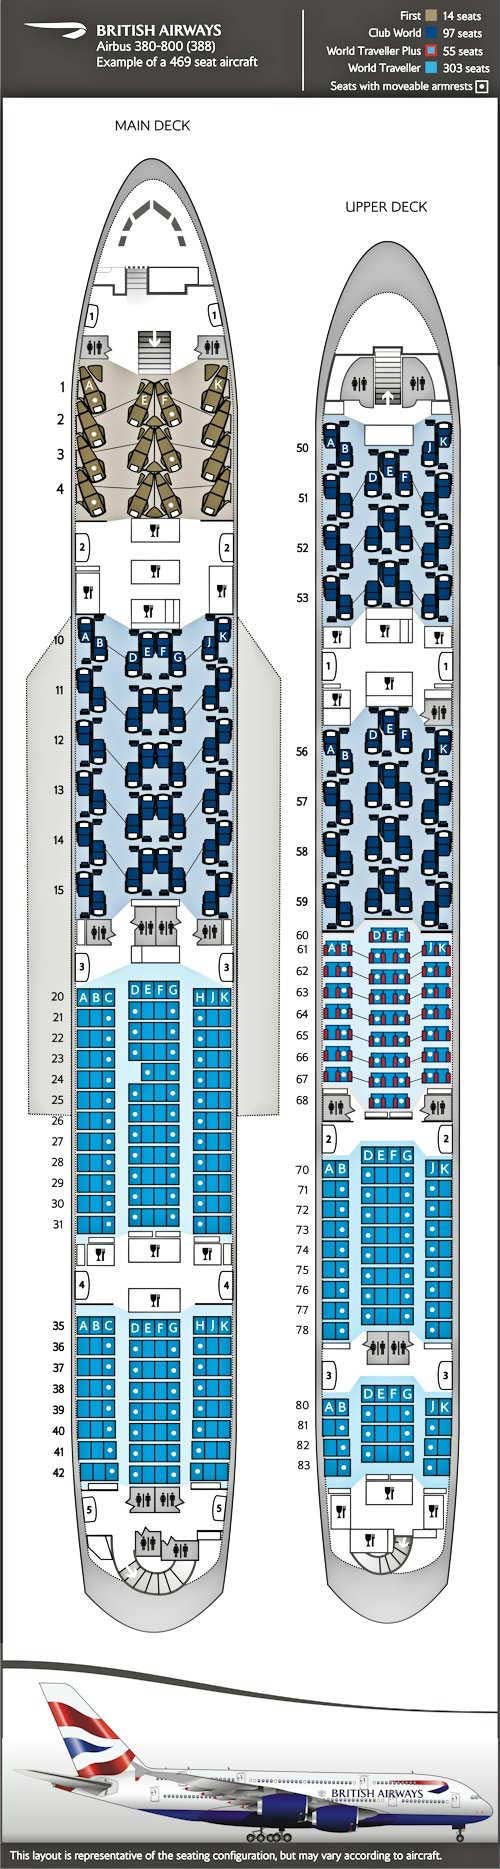 Seatmap for Airbus 380-800, 4 class 469 seat layout.